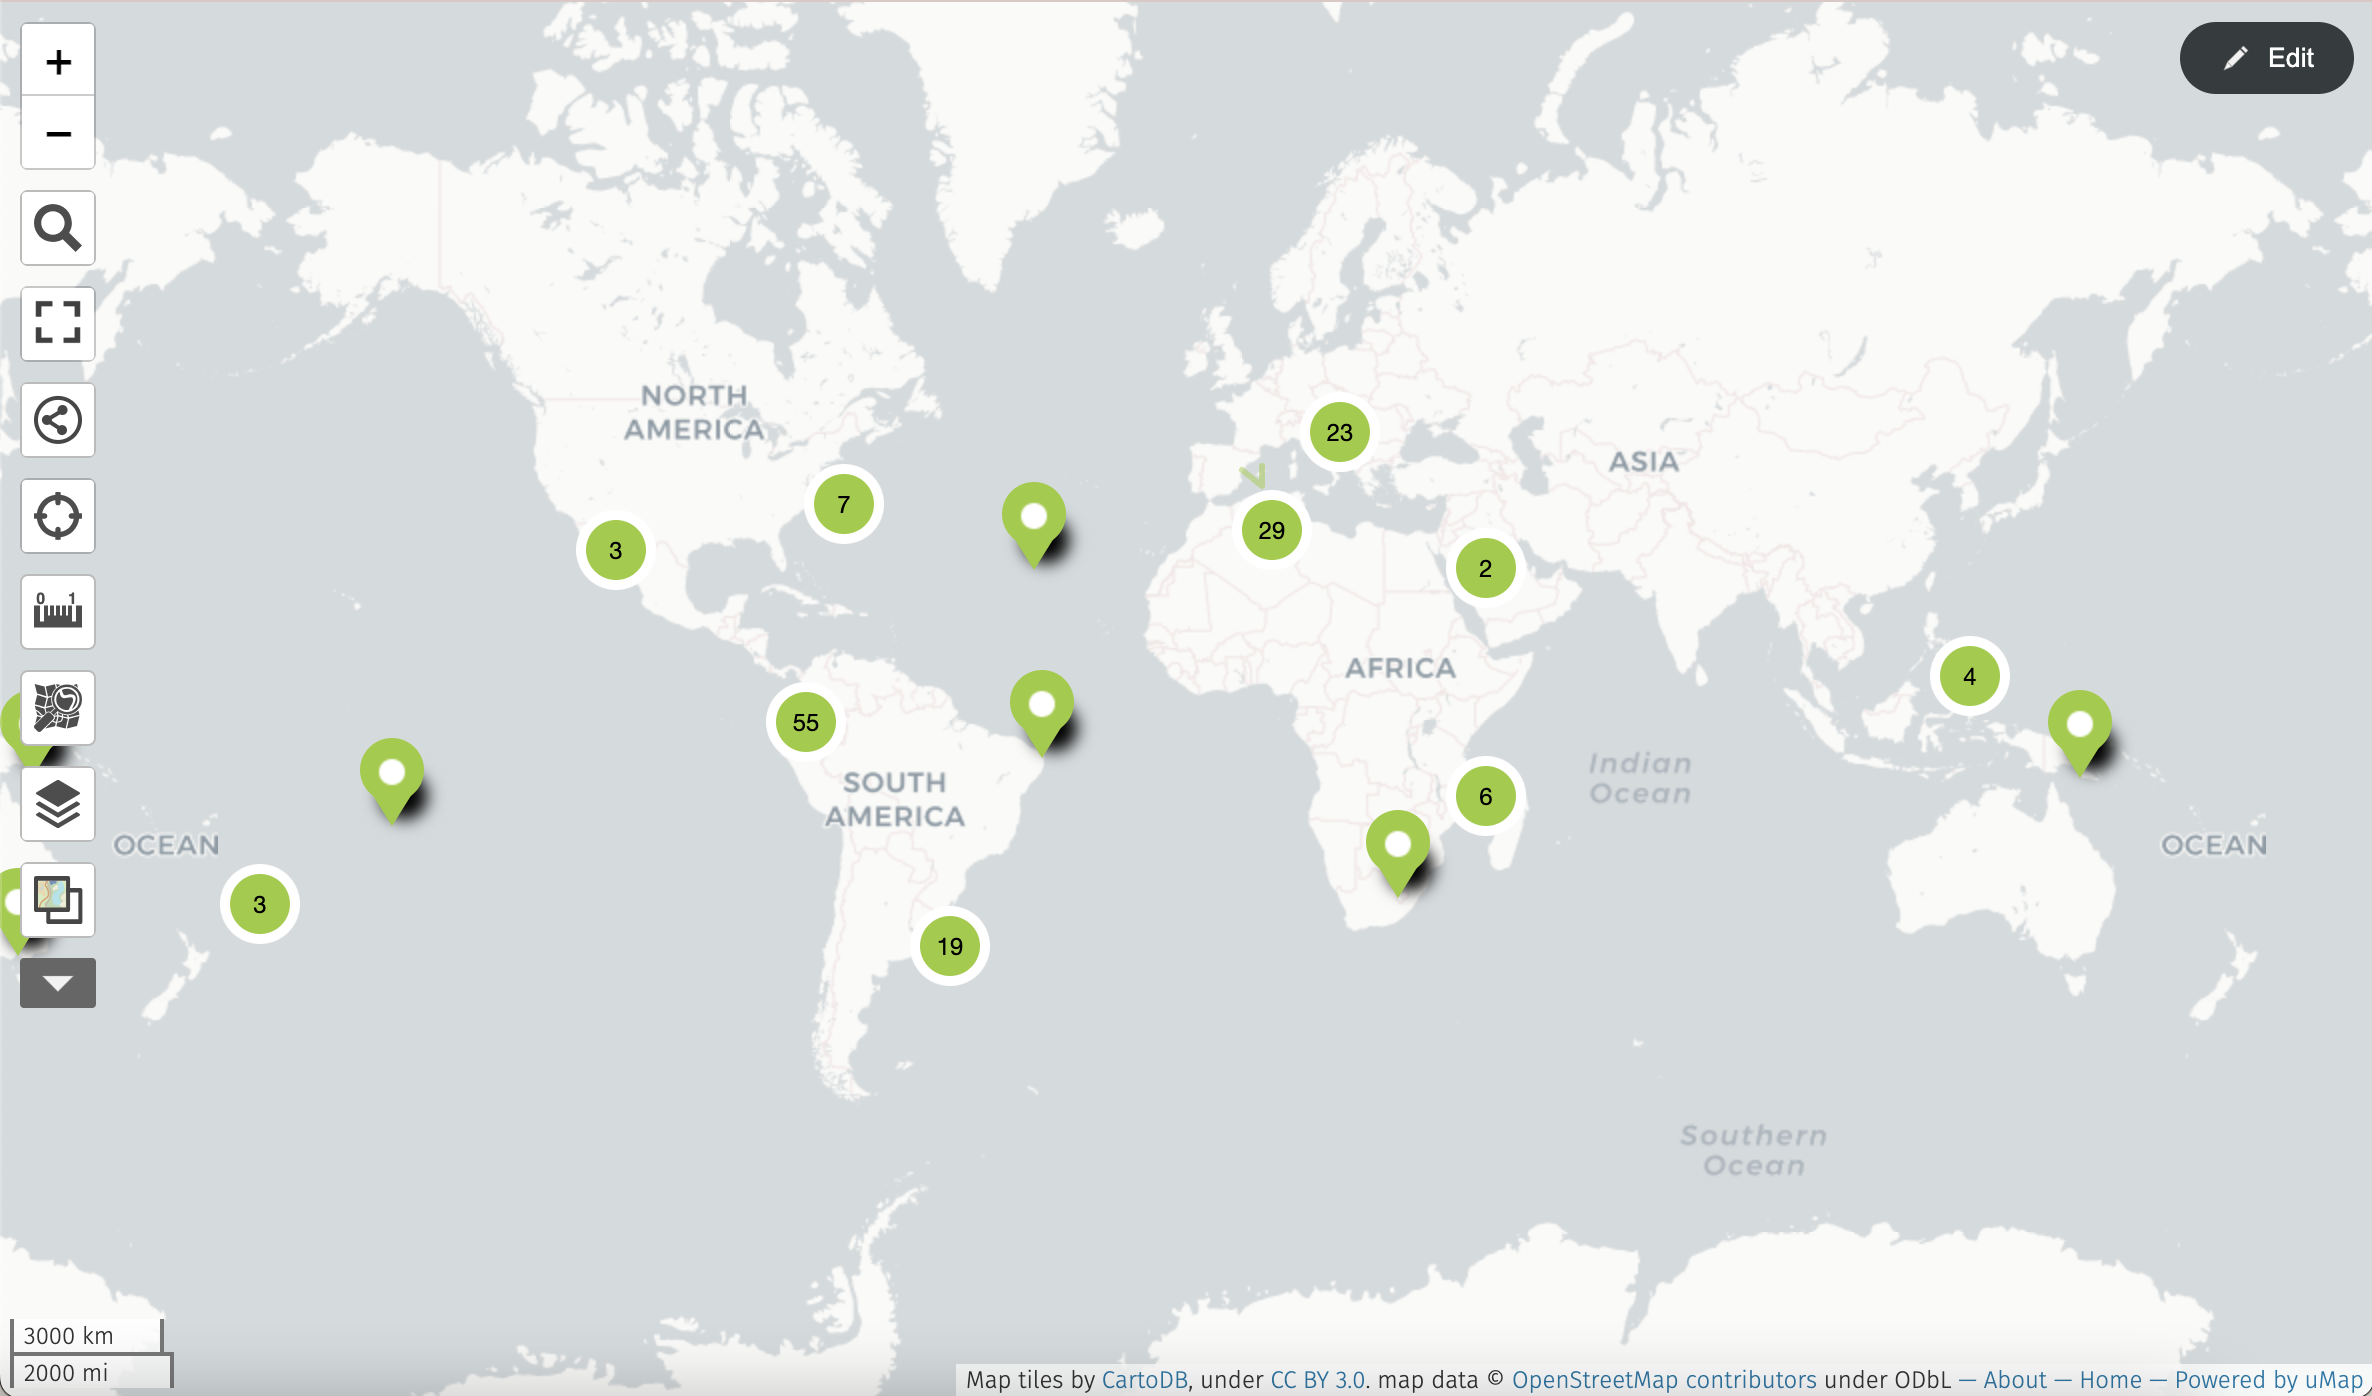 Screen shot of the interactive map of Geochicas across the world. The. maps shows the number of members in different locations, in the screenshot we can see all the world with Geochicas located in North America, South America, Africa, Europe, and Oceania.